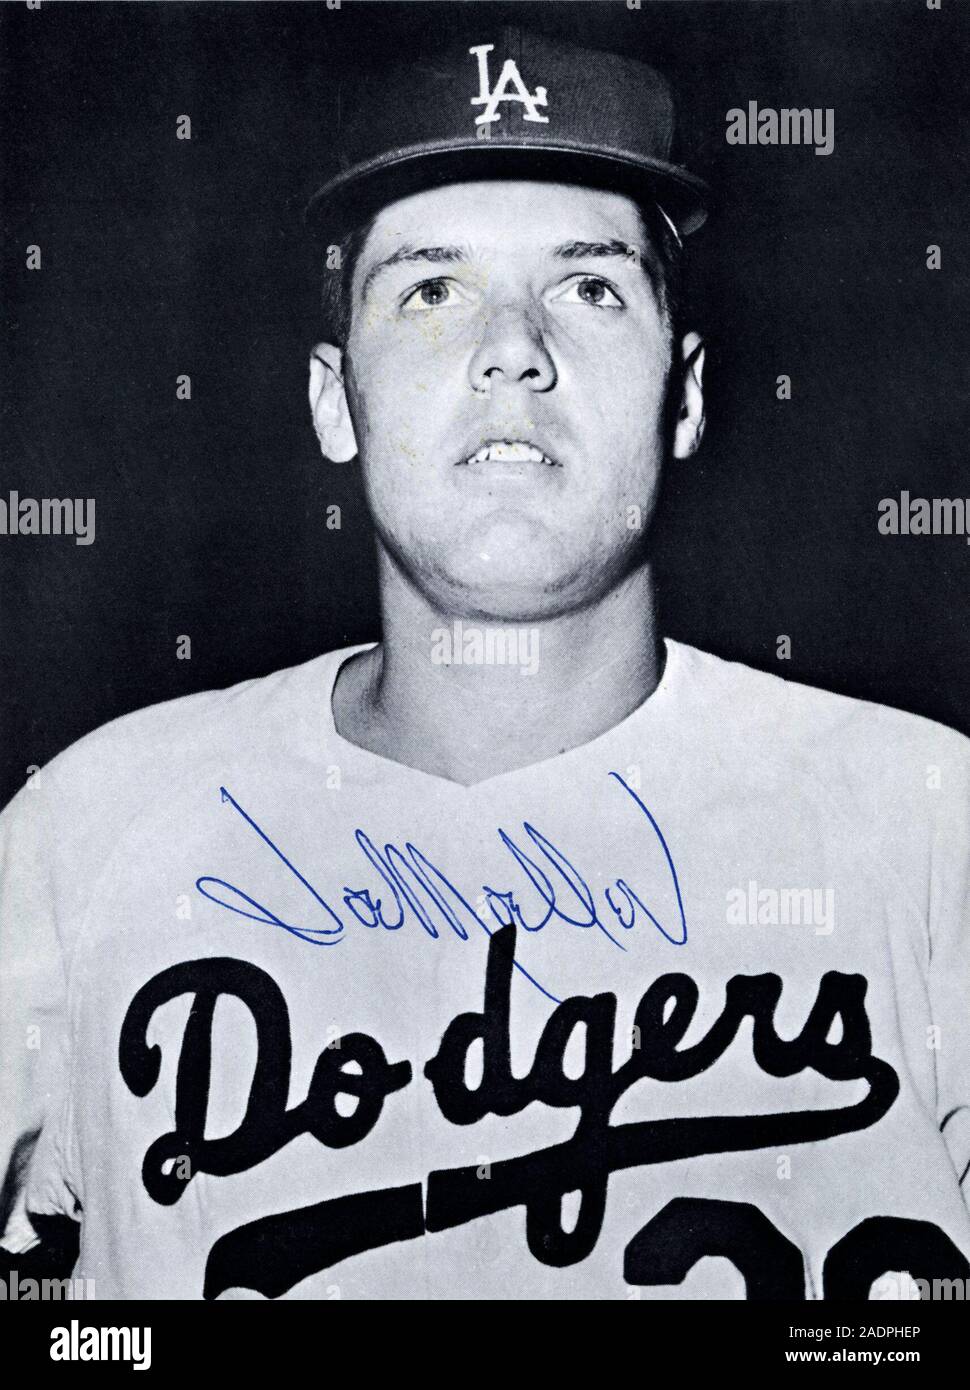 Vintage autographed black and white photo of Los Angeles dodgers baseball player Joe Moeller circa 1960s. Stock Photo